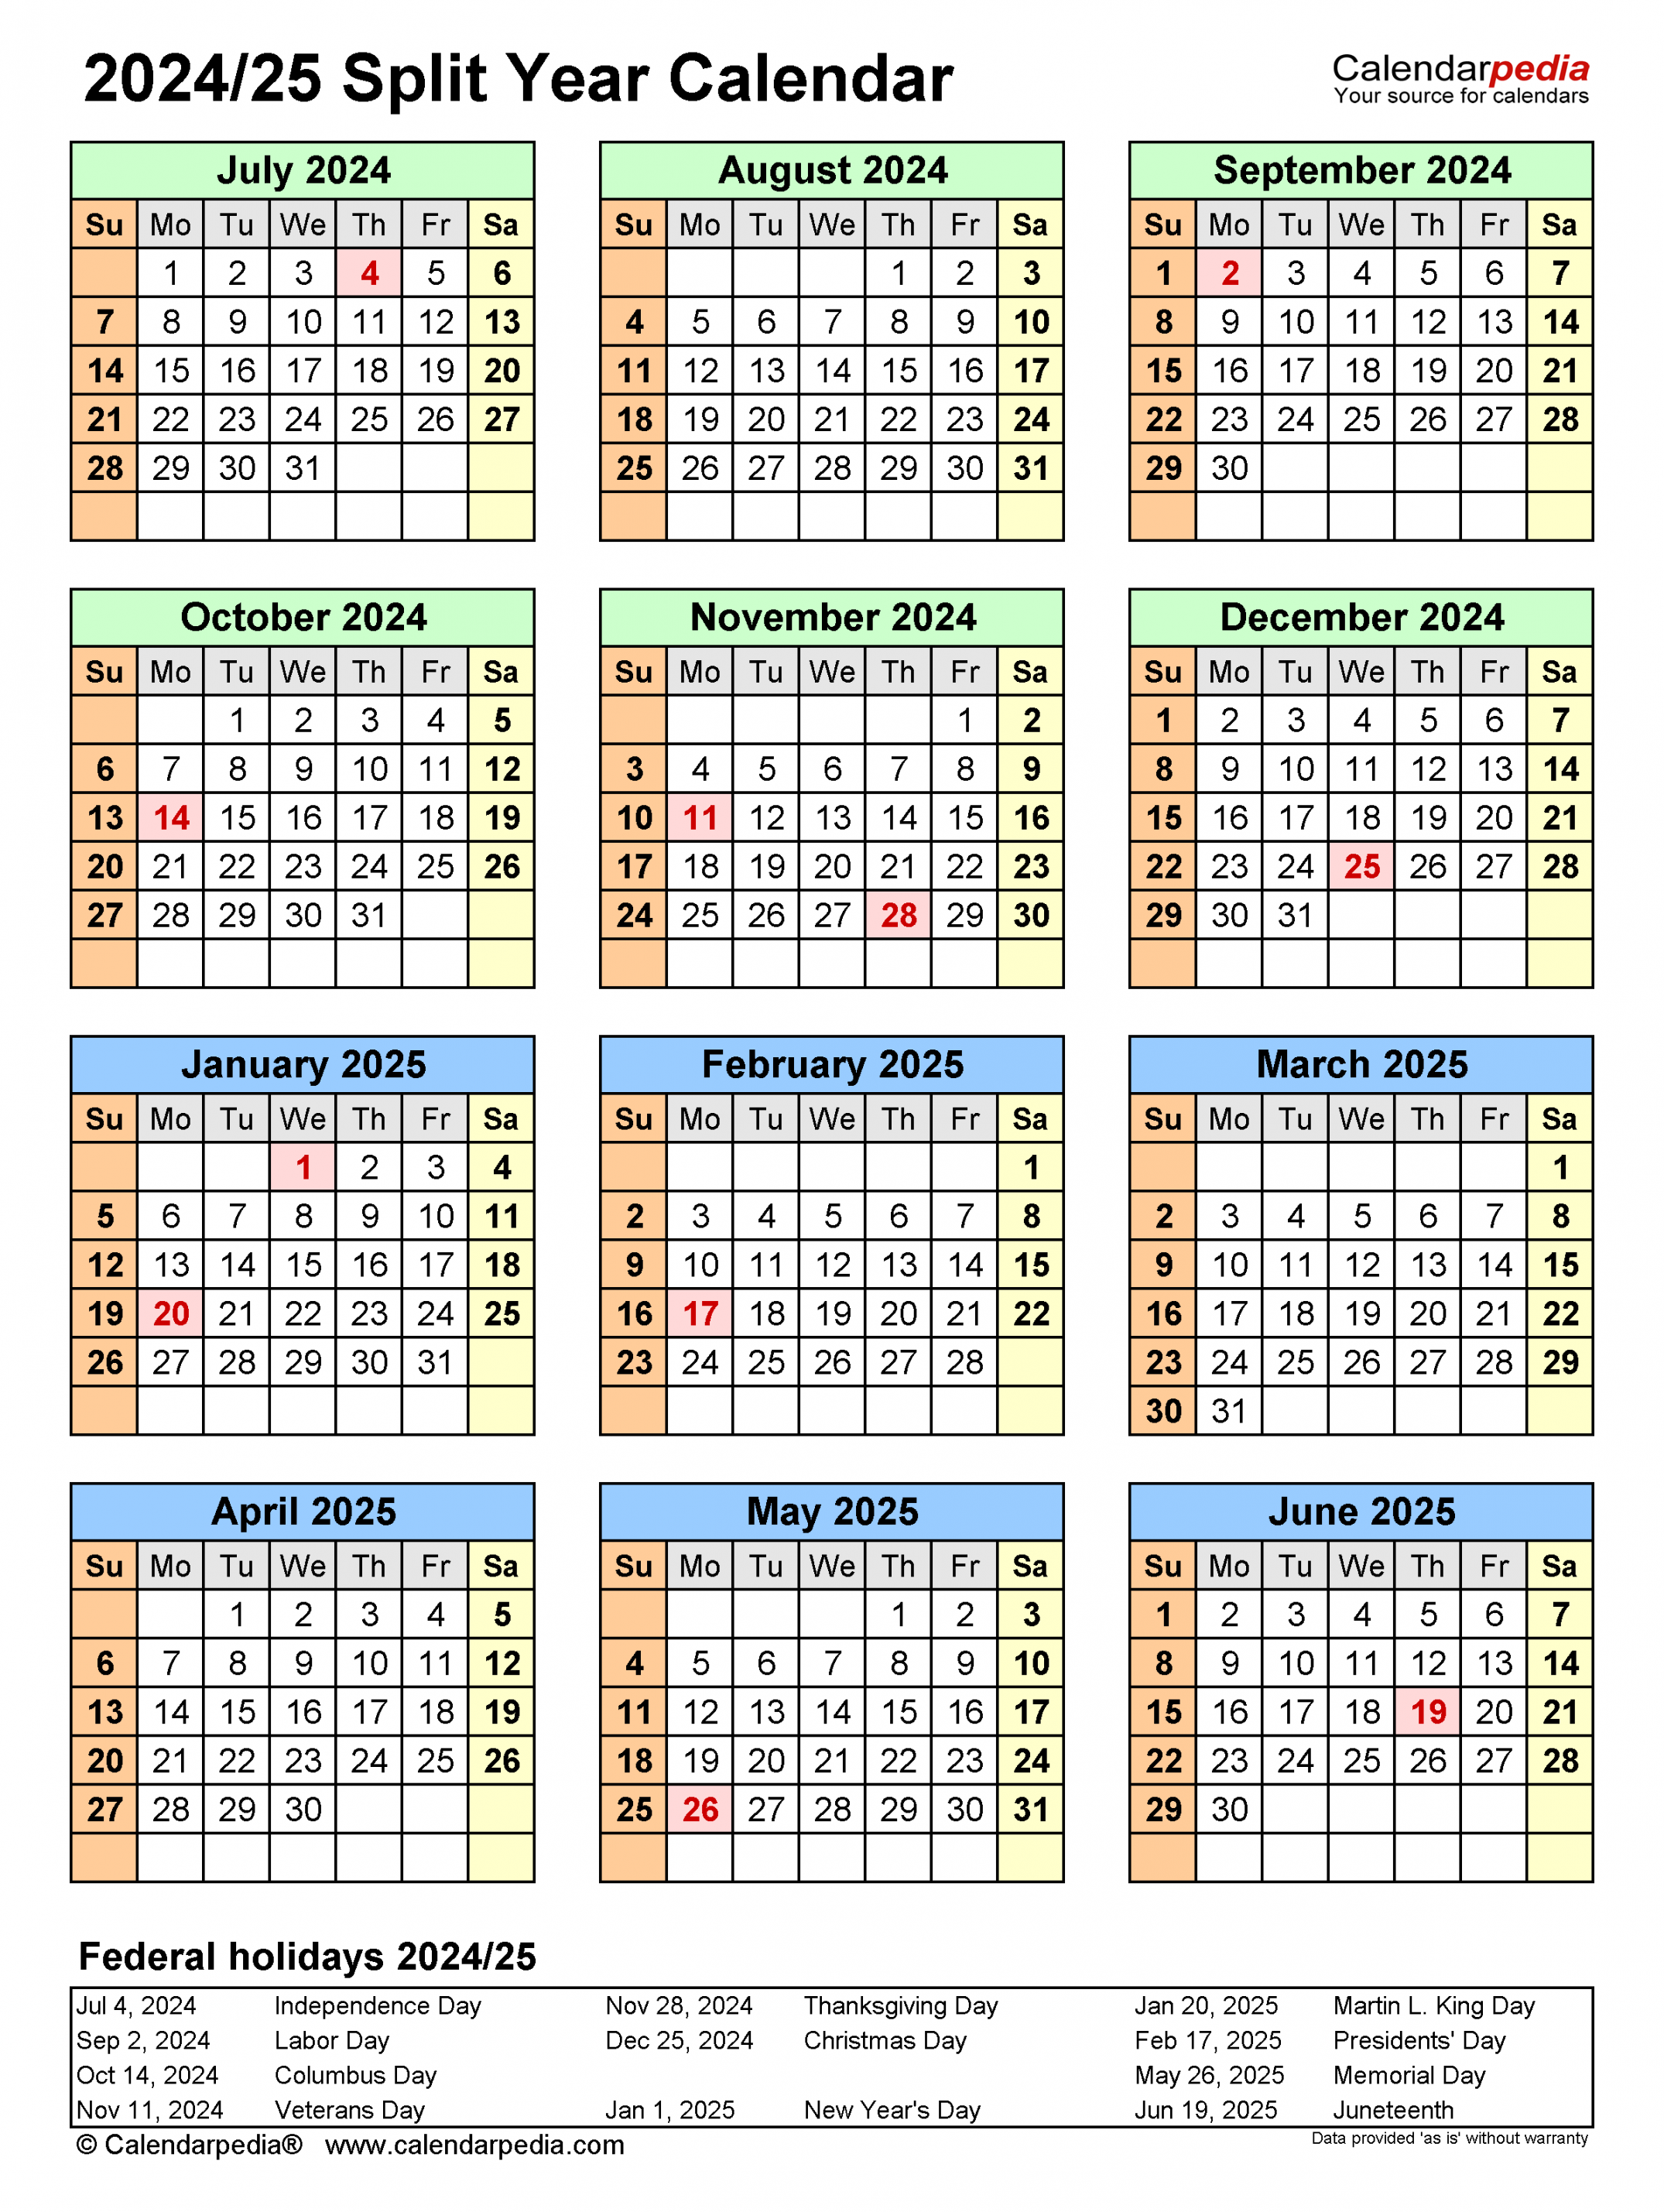 Split Year Calendars / (July to June) - Word templates